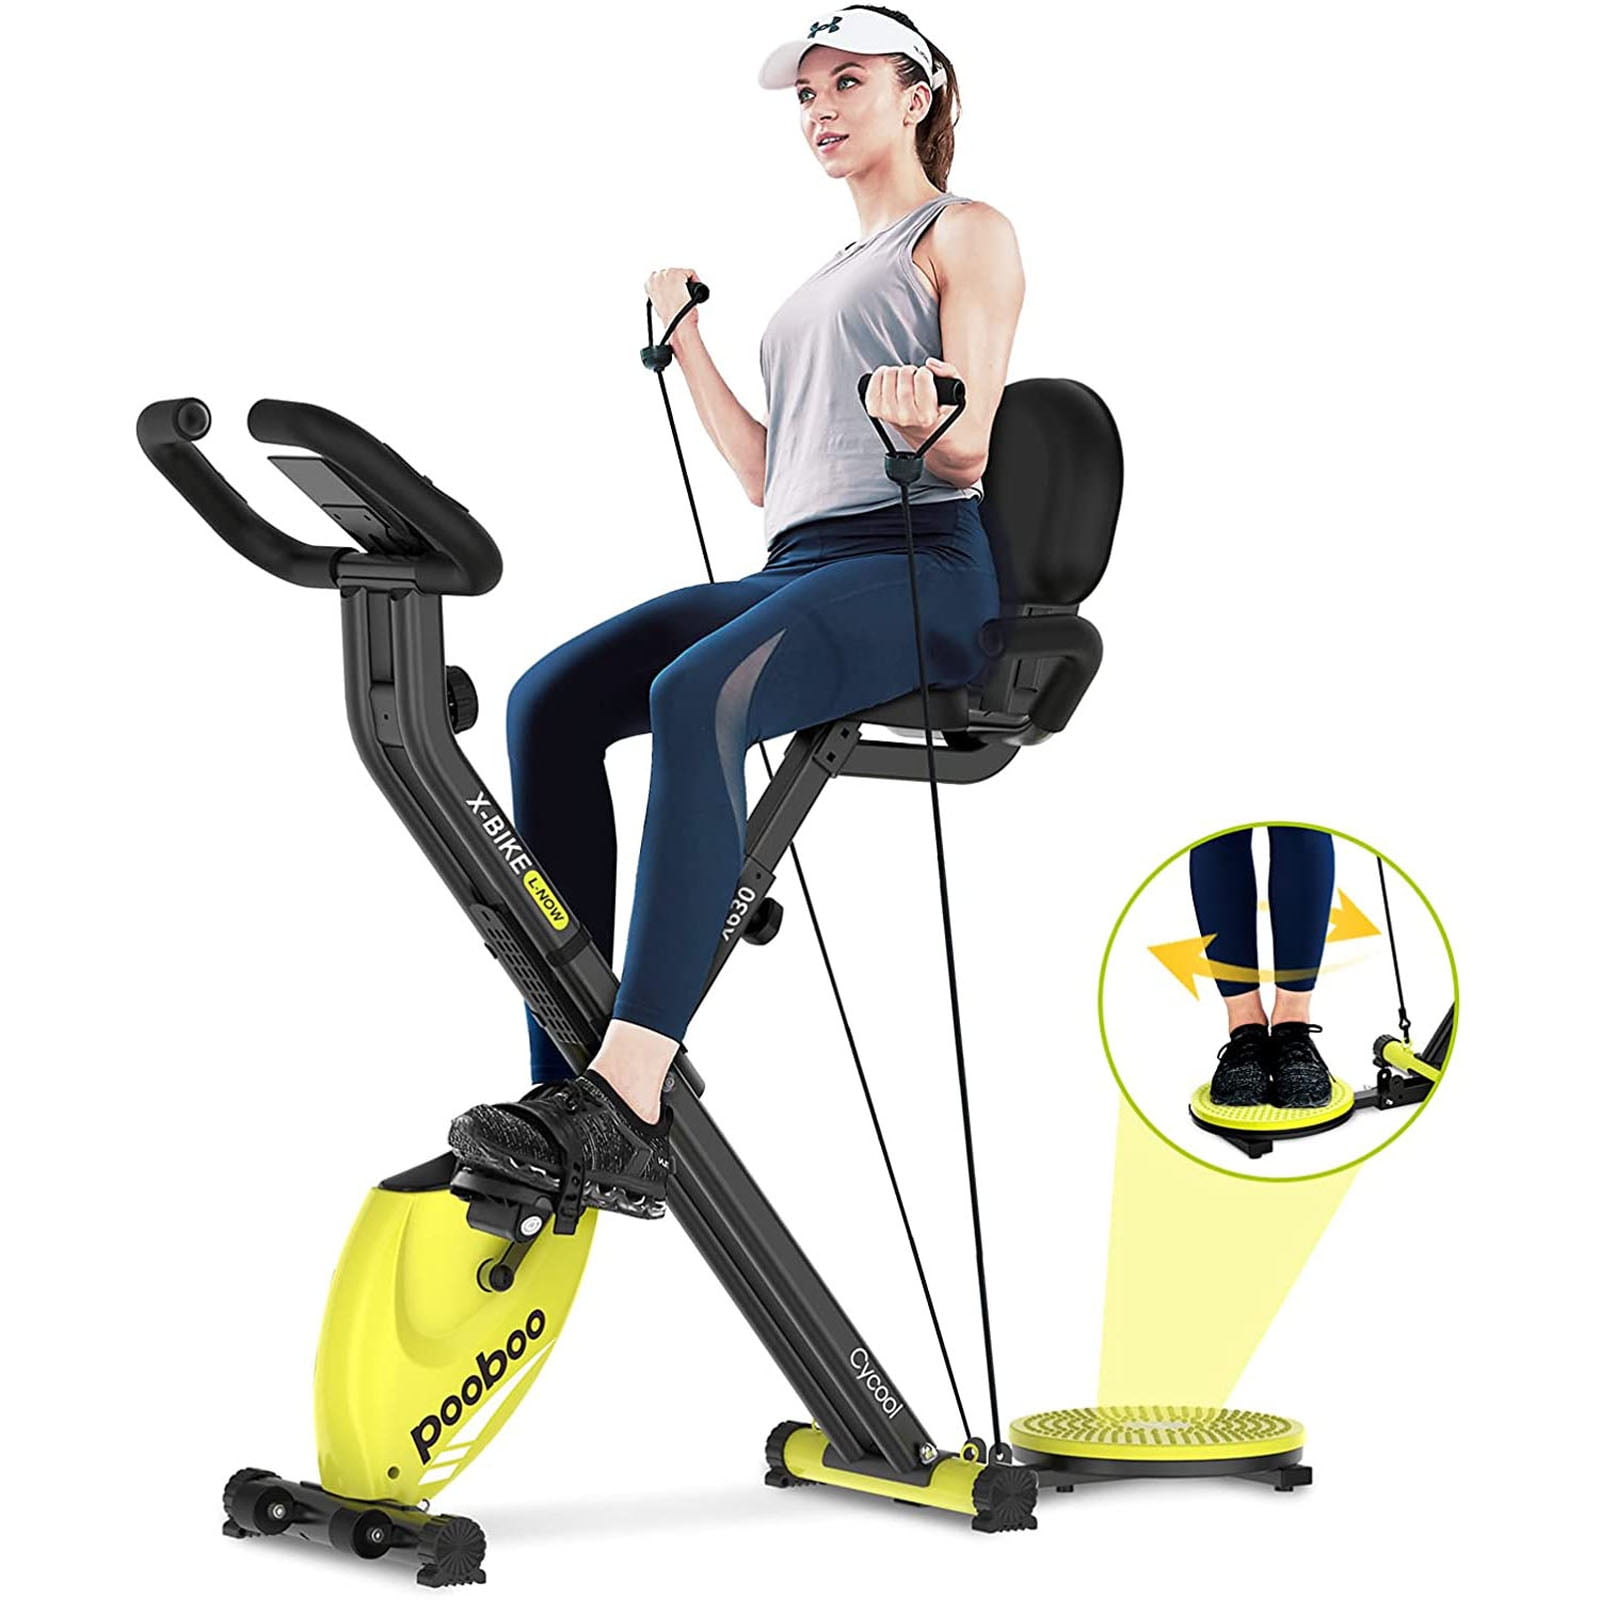 Pooboo Foldable Exercise bike,Indoor Cycling Bike,Folding Magnetic Upright Stationary bike with LCD Monitor&phone holder Dumbbells,Pull Rope,Pulse,phone Holder 